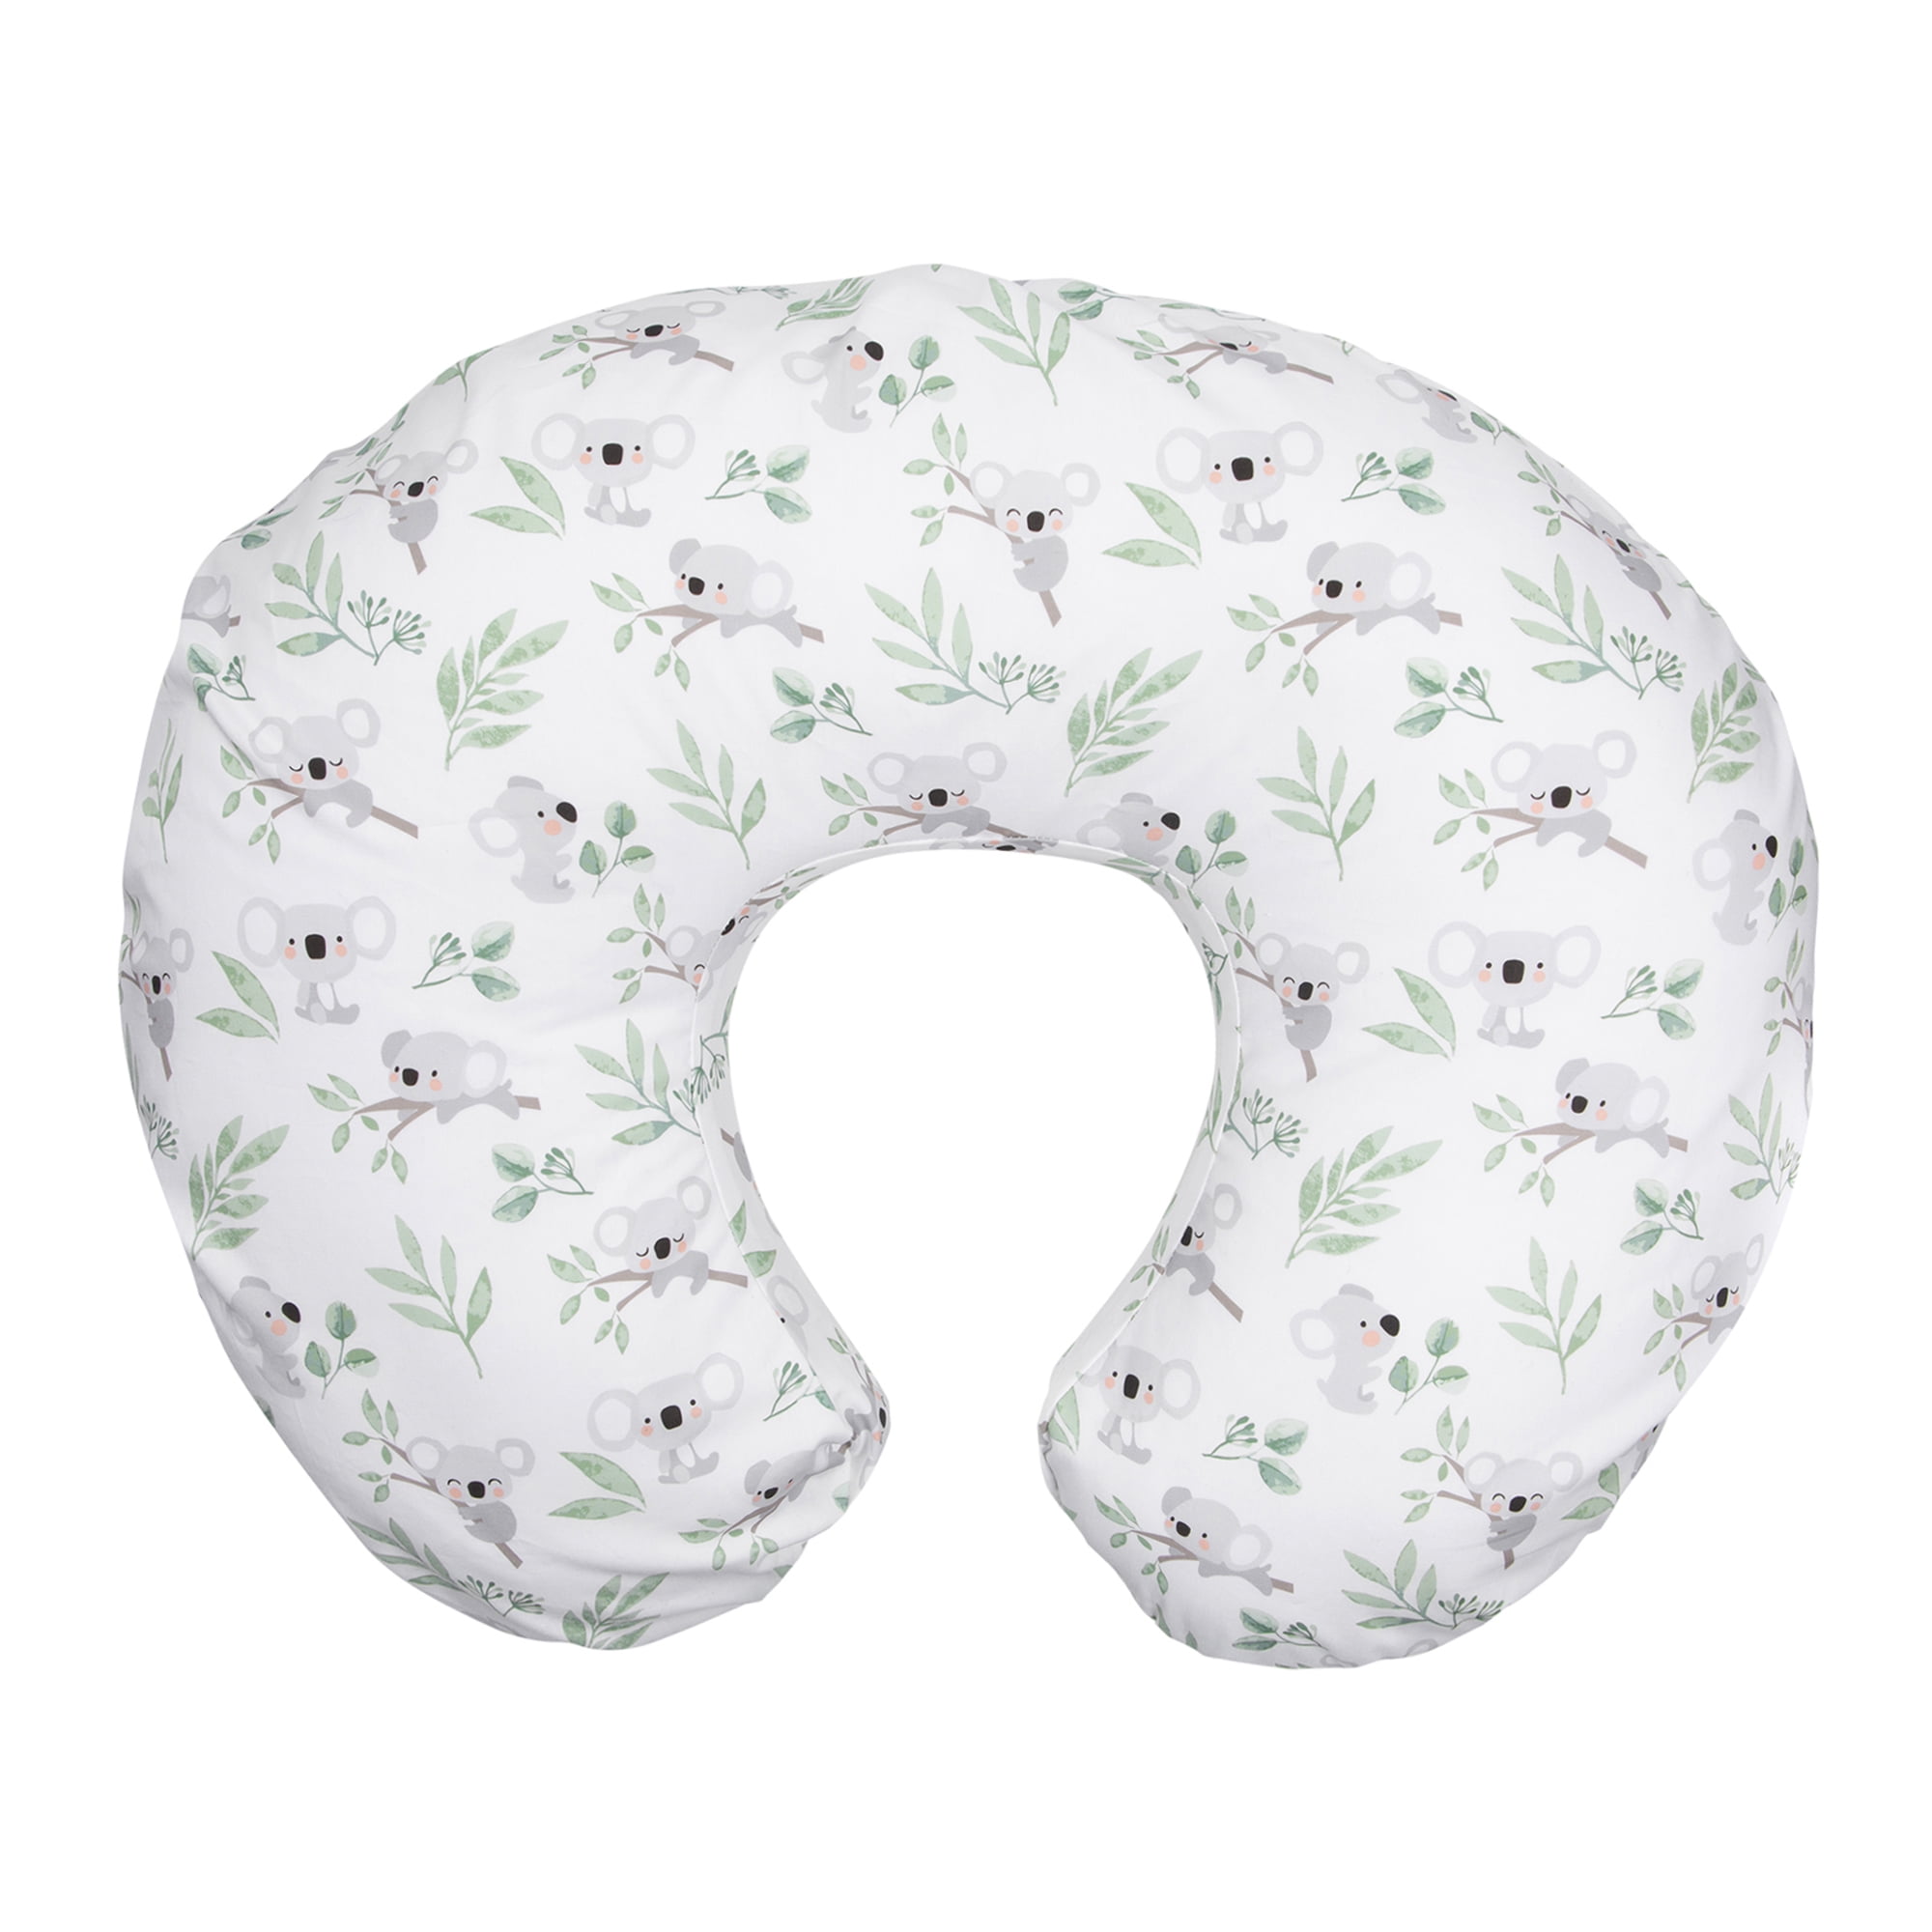 Chicco Chicco Boppy Nursing And Infant Support Pillow And Forest Animal Zipped Cover 